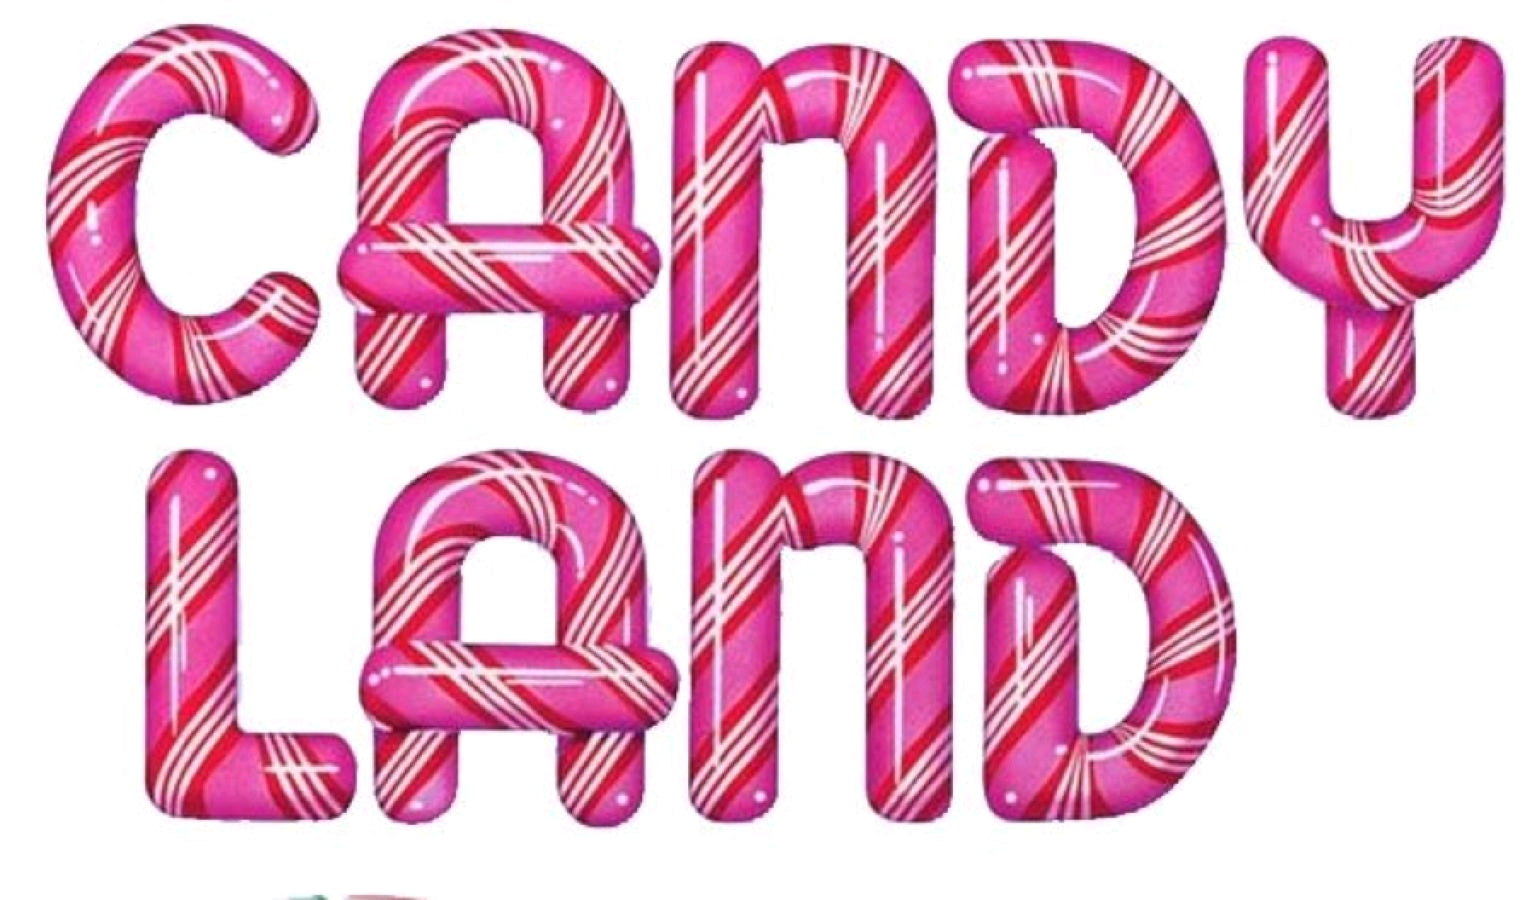 Candy Land - Take Me To The Candy Zip Purse